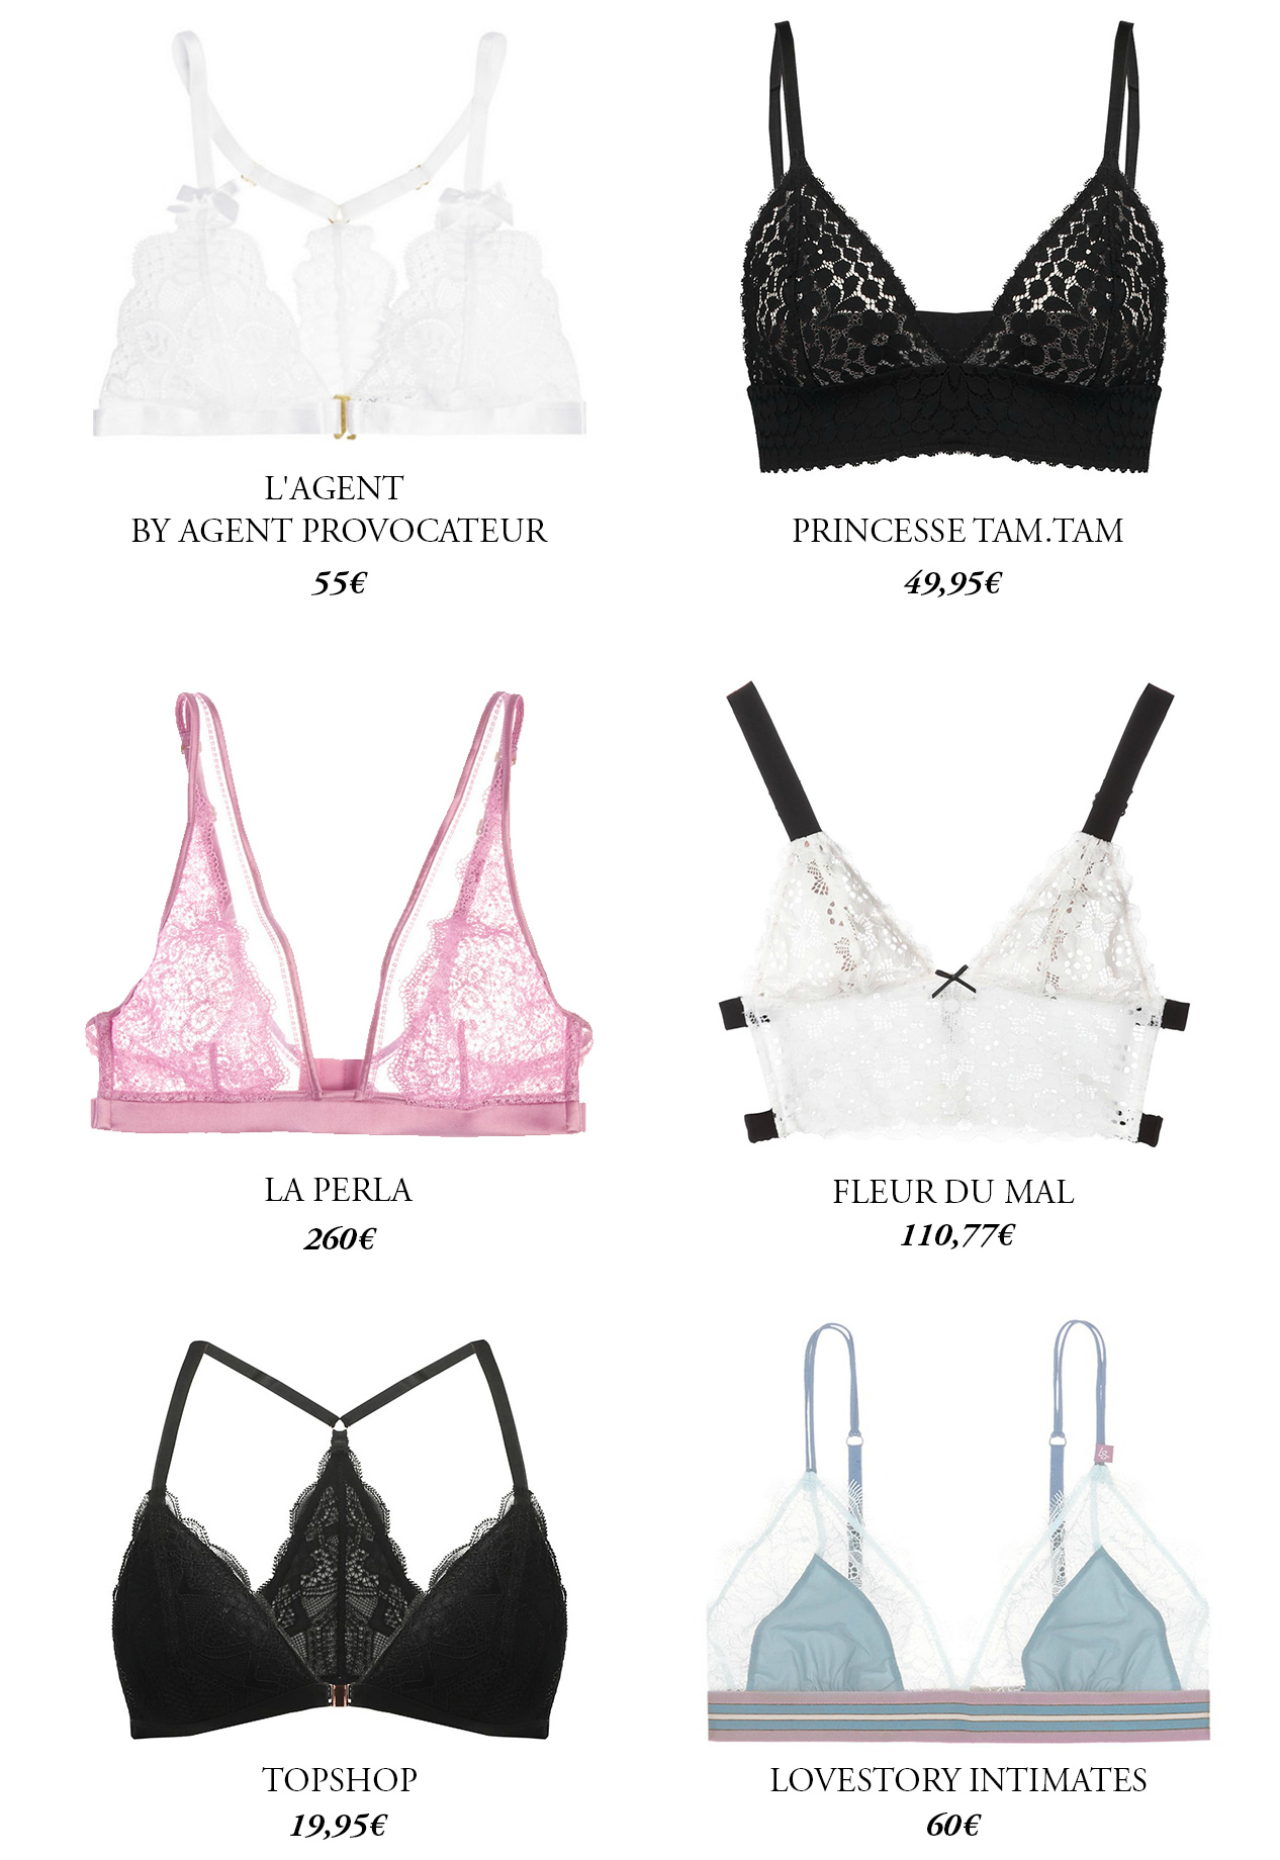 CRAVINGS: lace bras for every budget.